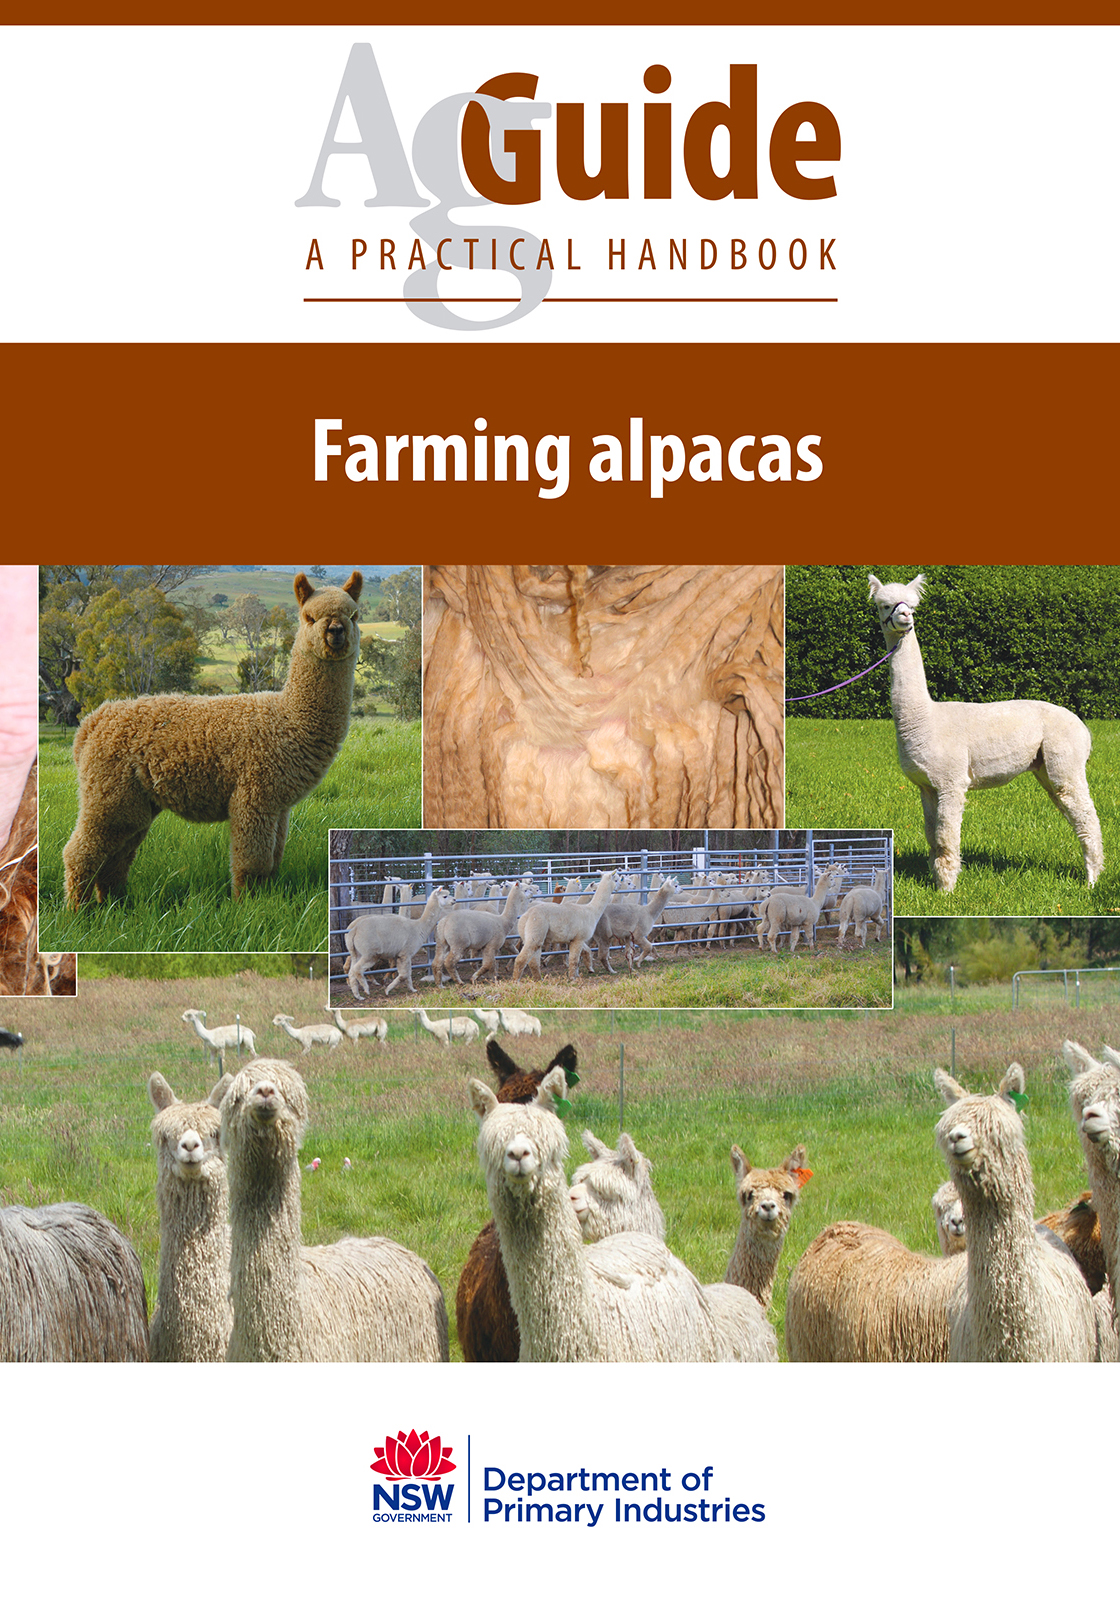 Alpaca AGSKILLS - A Practical handbook to Farming Alpacas by Fiona Vanderbeek for NSW Dept Industry and Investment (Copy)